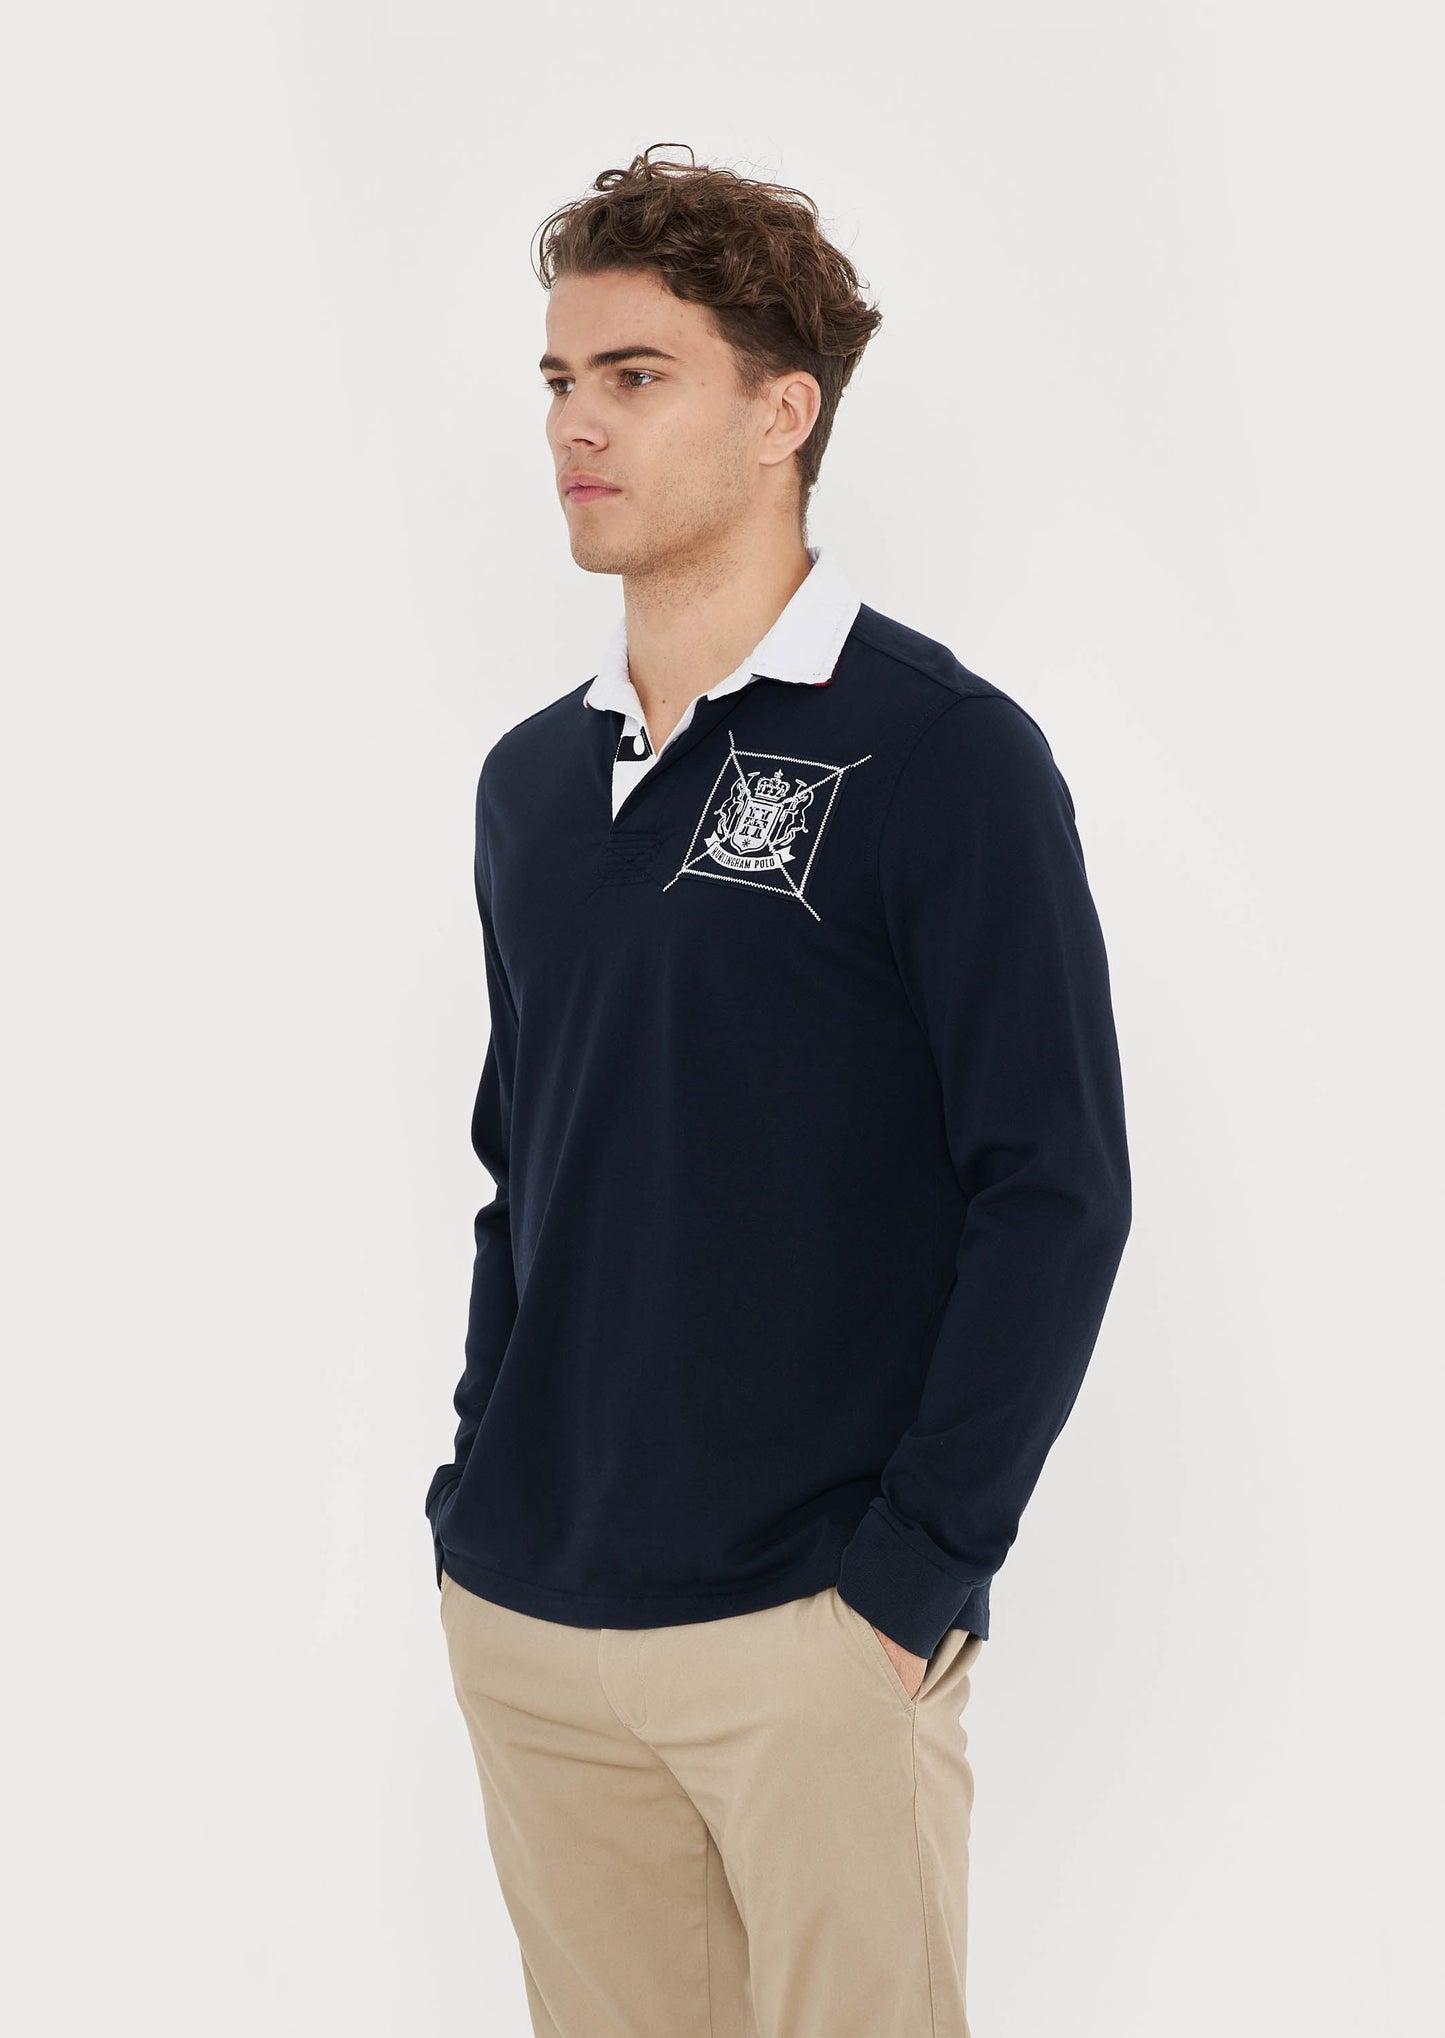 Classic Hurlingham Polo Rugby Shirt - Navy